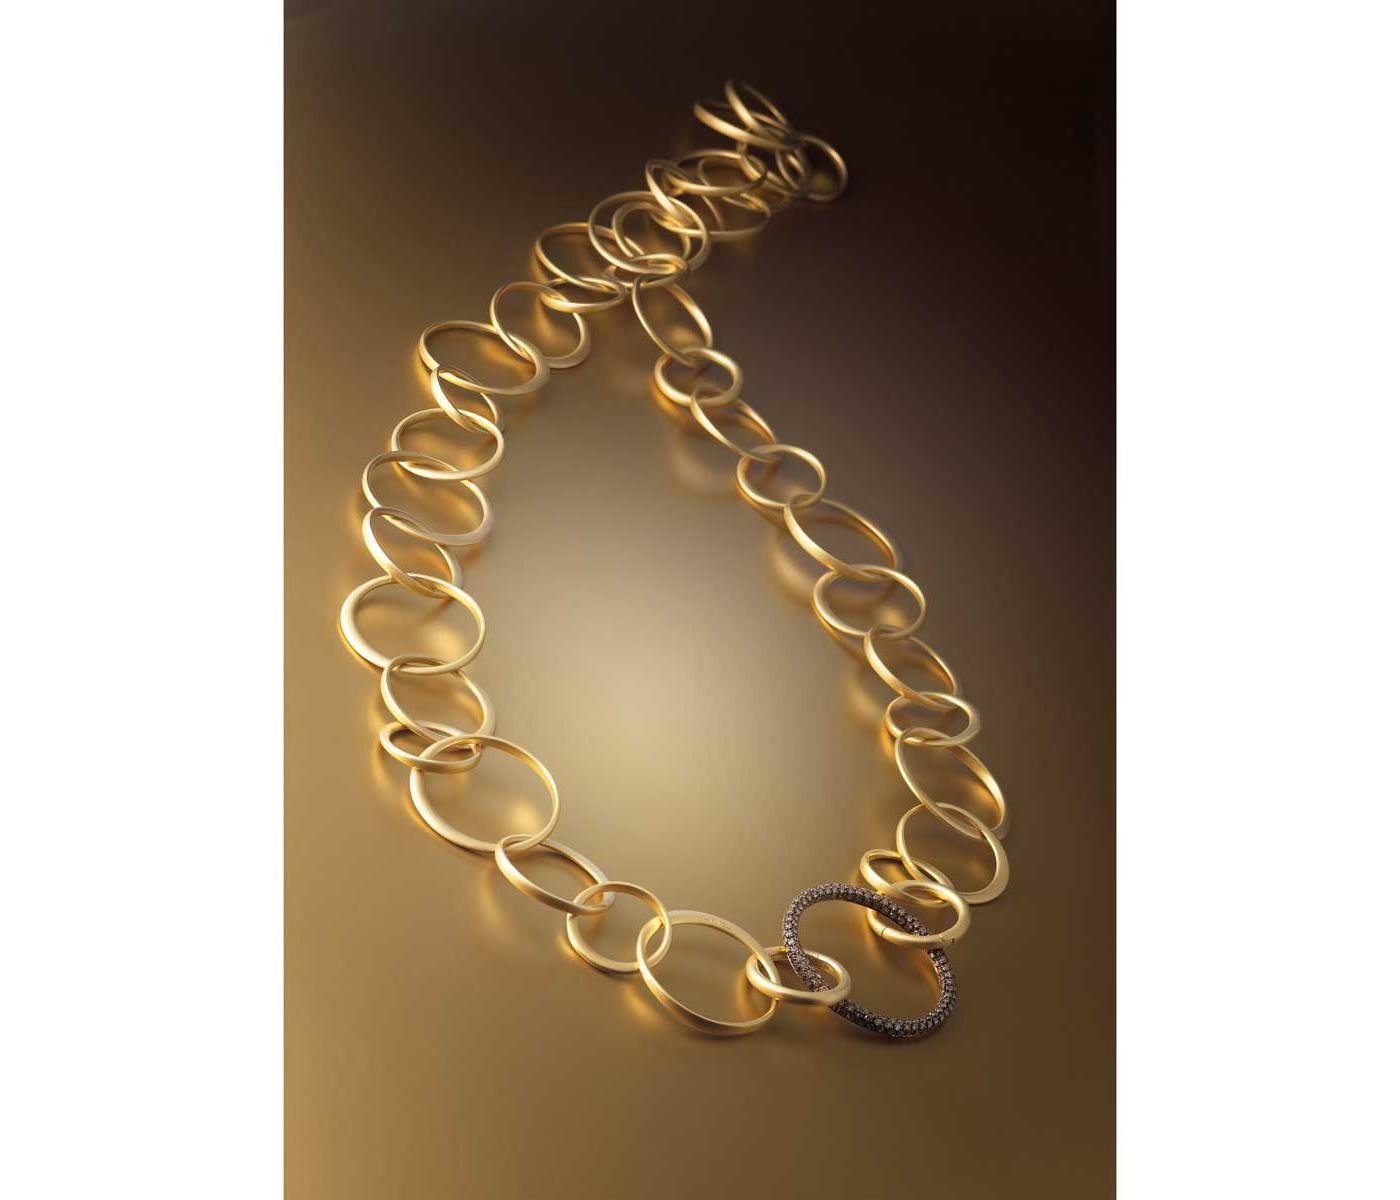 Necklace by Garavelli